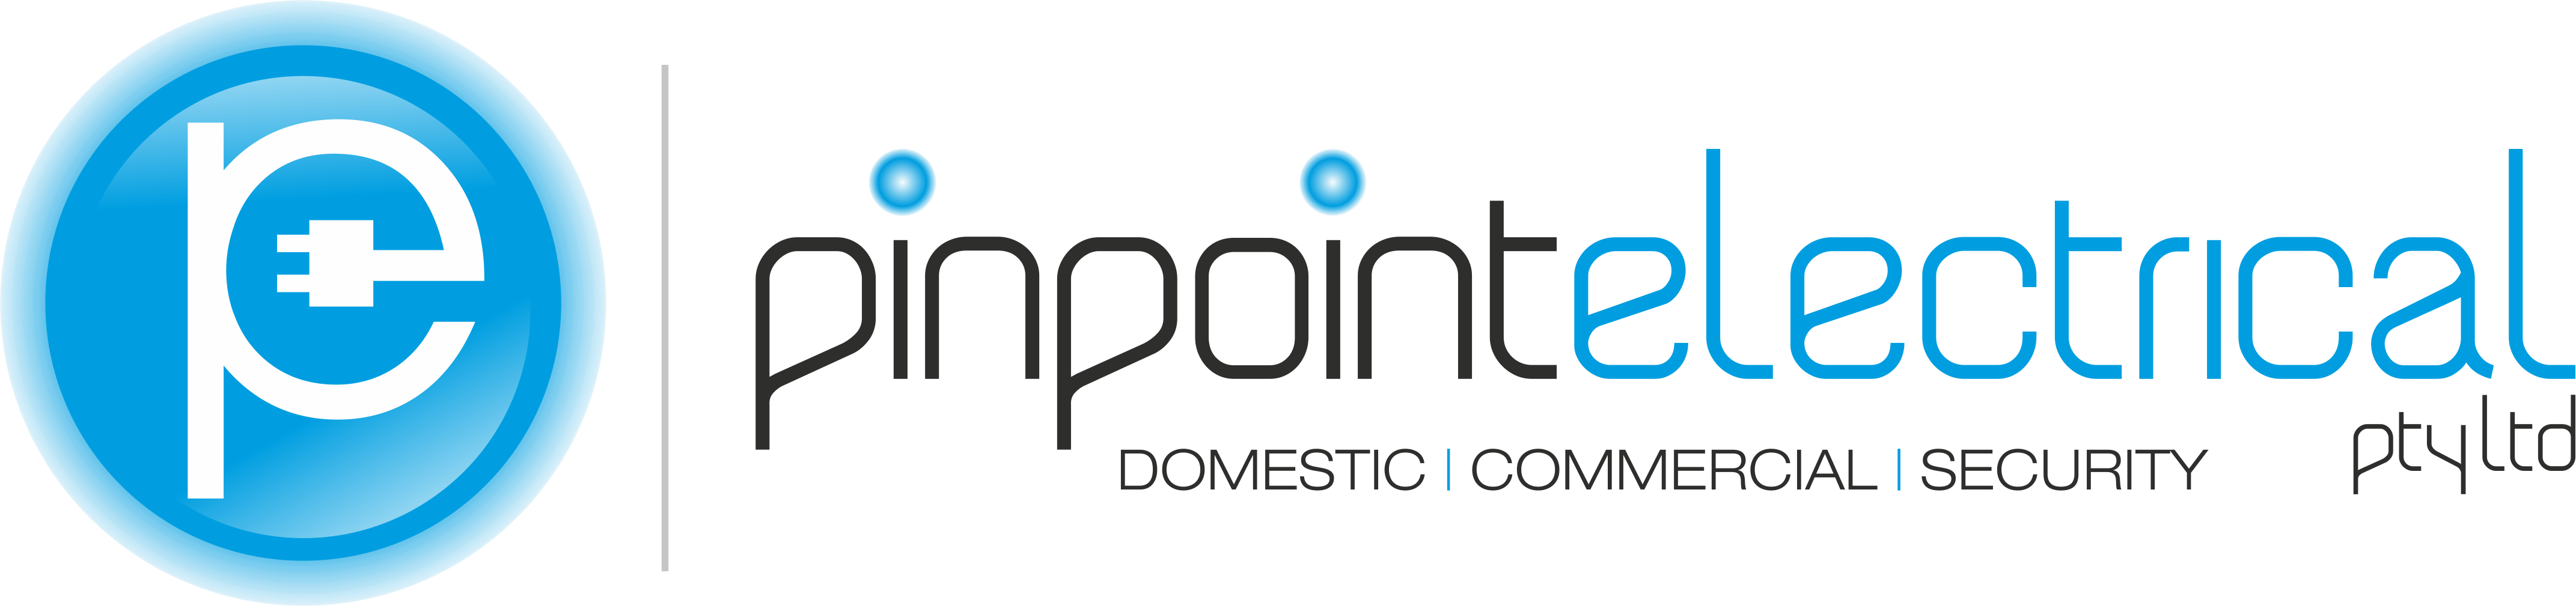 Pinpoint Electrical